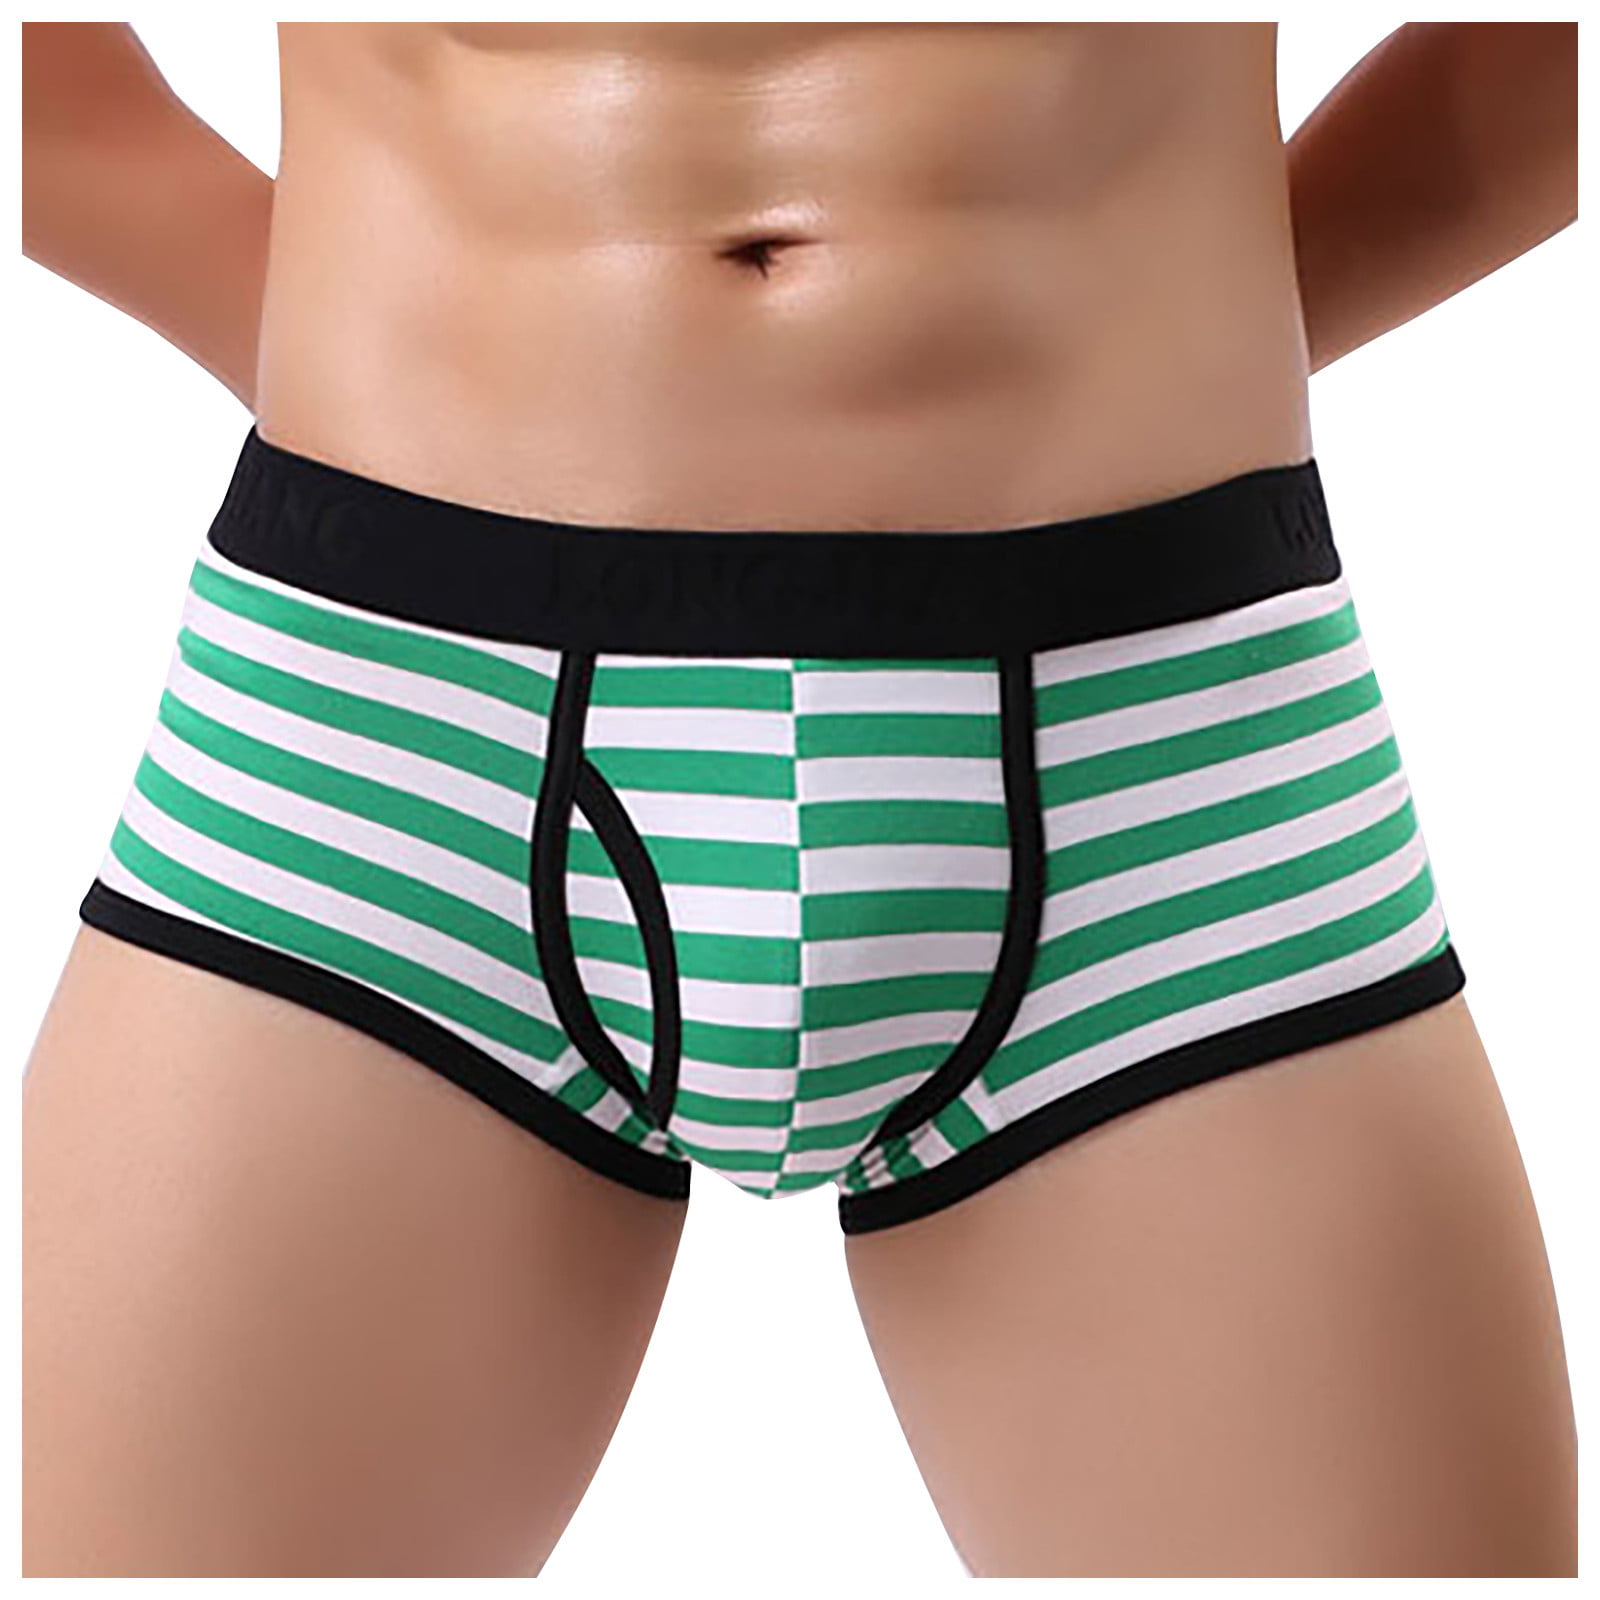 SDJMa Men's Micro Modal Boxer Briefs Soft Men's Solid Briefs Fashion  Underwear Personalized Mid-waist Hoop Panties Buttock Covering Briefs 